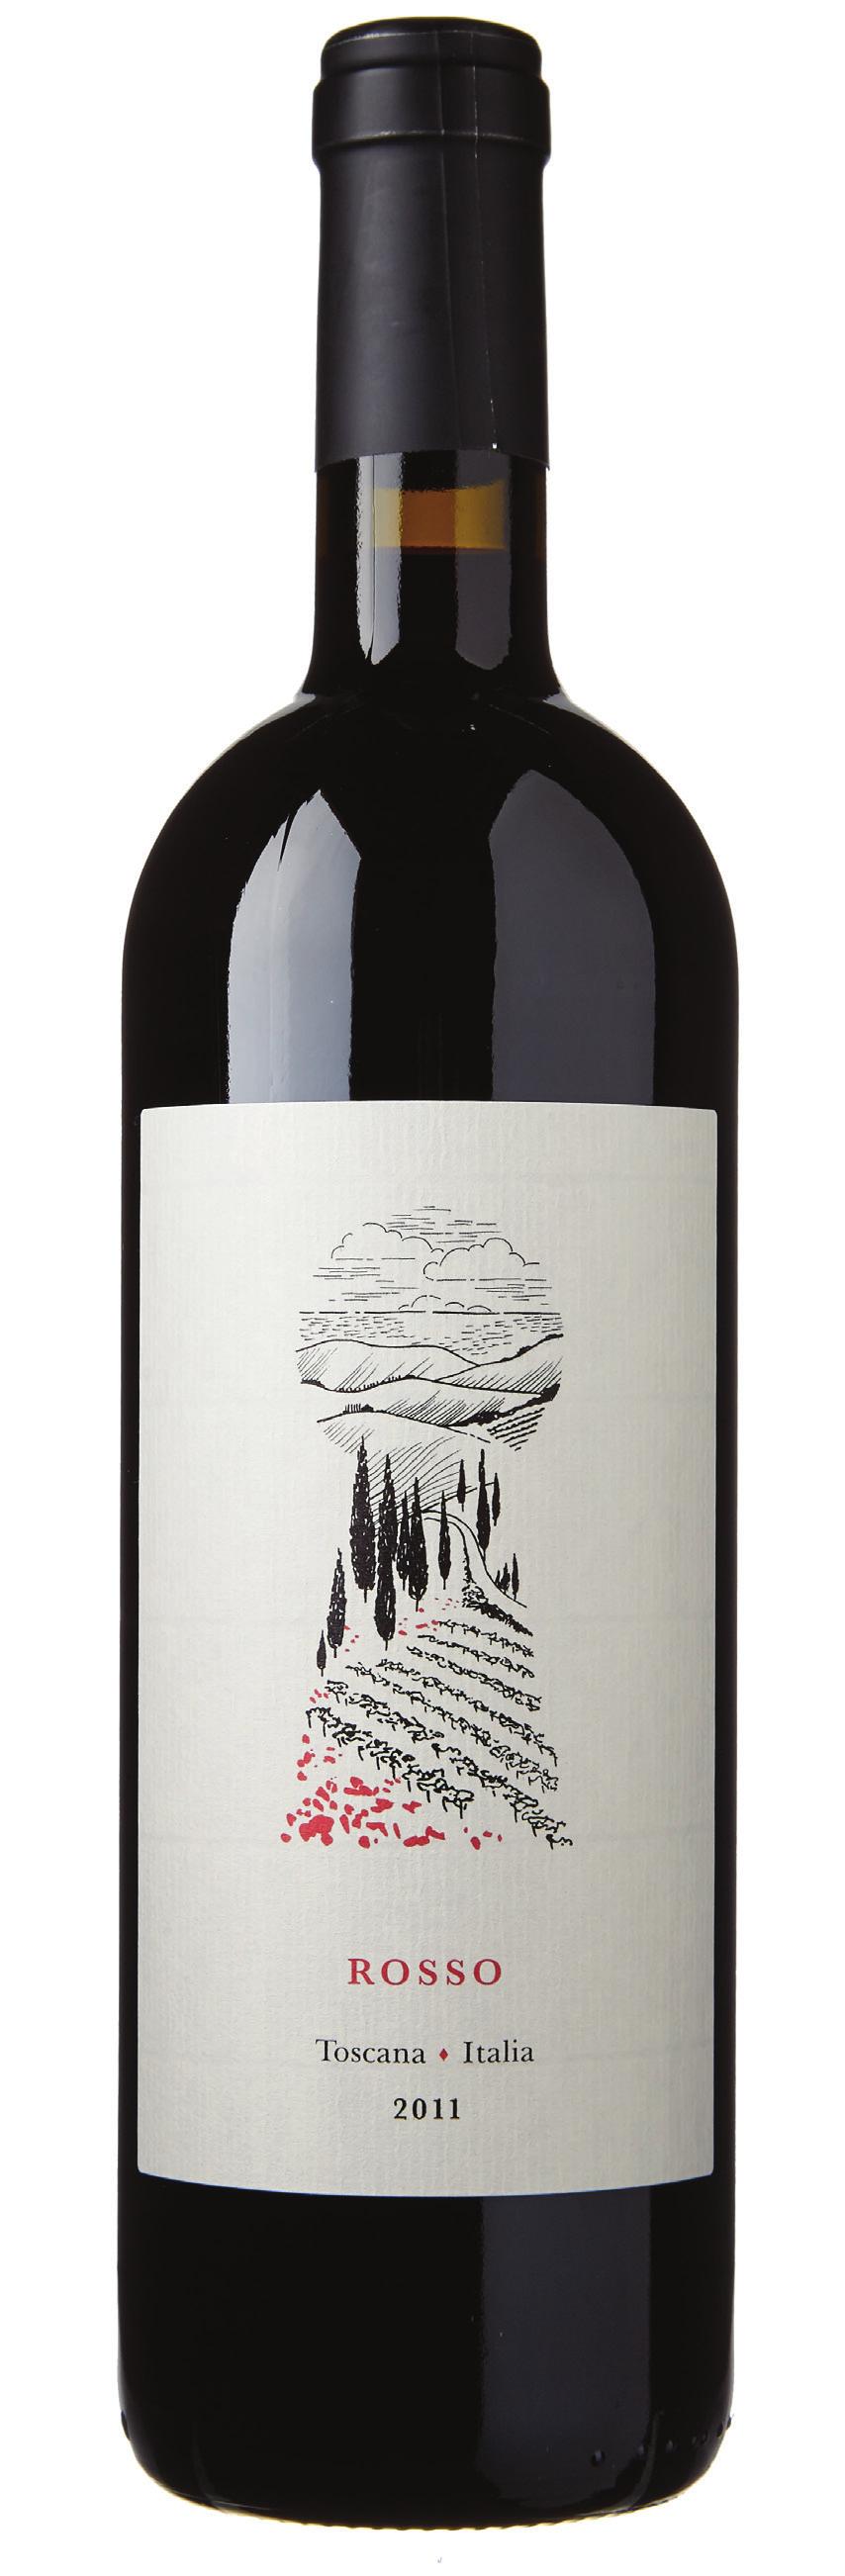 ROSSO TOSCANA ITALY - 2011 50% Cabernet Sauvignon - 50% Merlot The grapes that go into this Cab/Merlot blend are harvested mostly from the Tuscan coast.